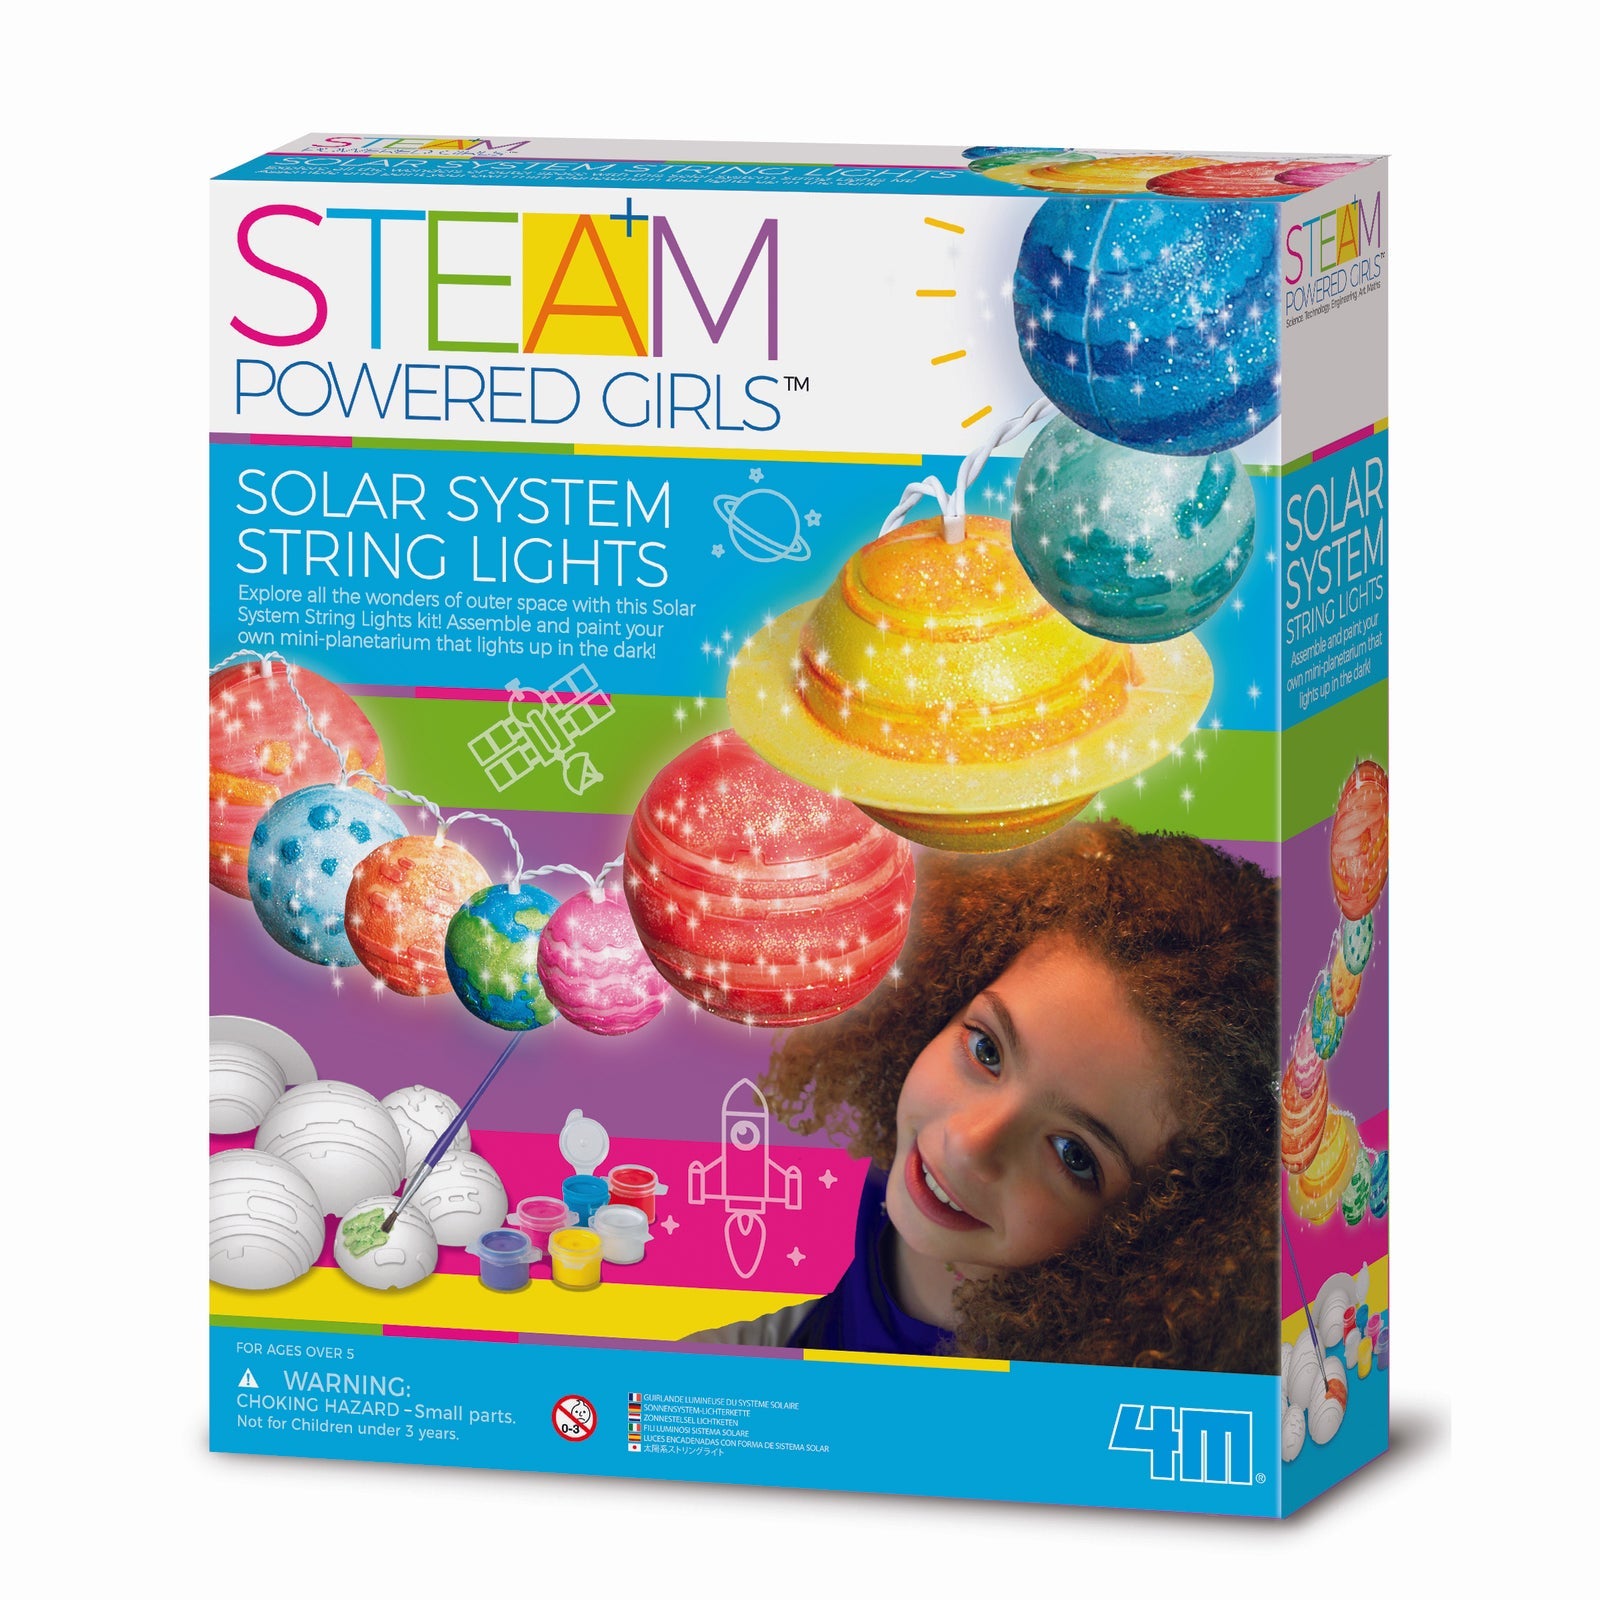 STEAM POWERED KIDS - SOLAR SYSTEM TOYS STRING LIGHTS | Buy Science Kits ...